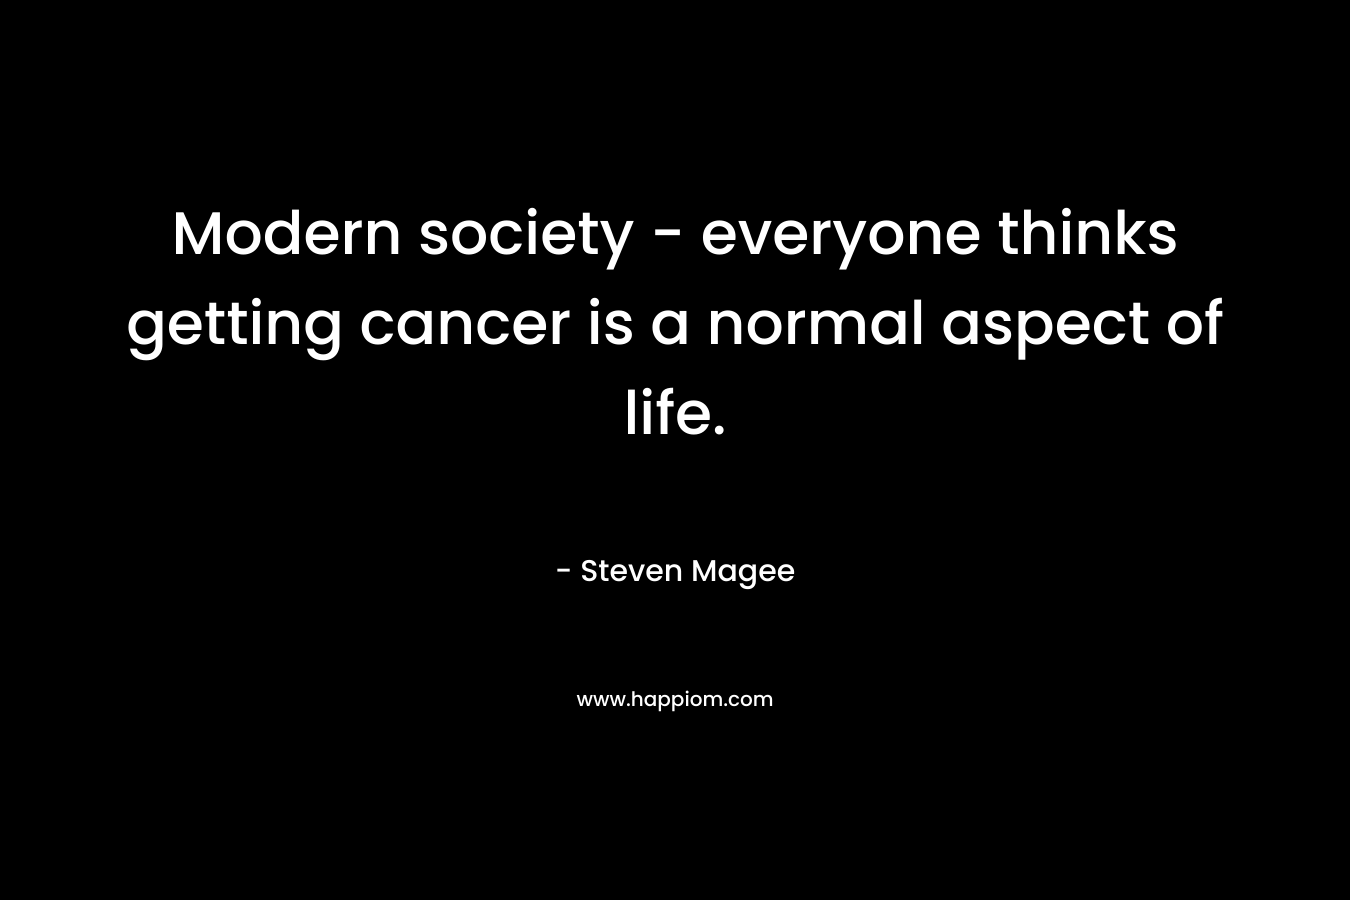 Modern society - everyone thinks getting cancer is a normal aspect of life.